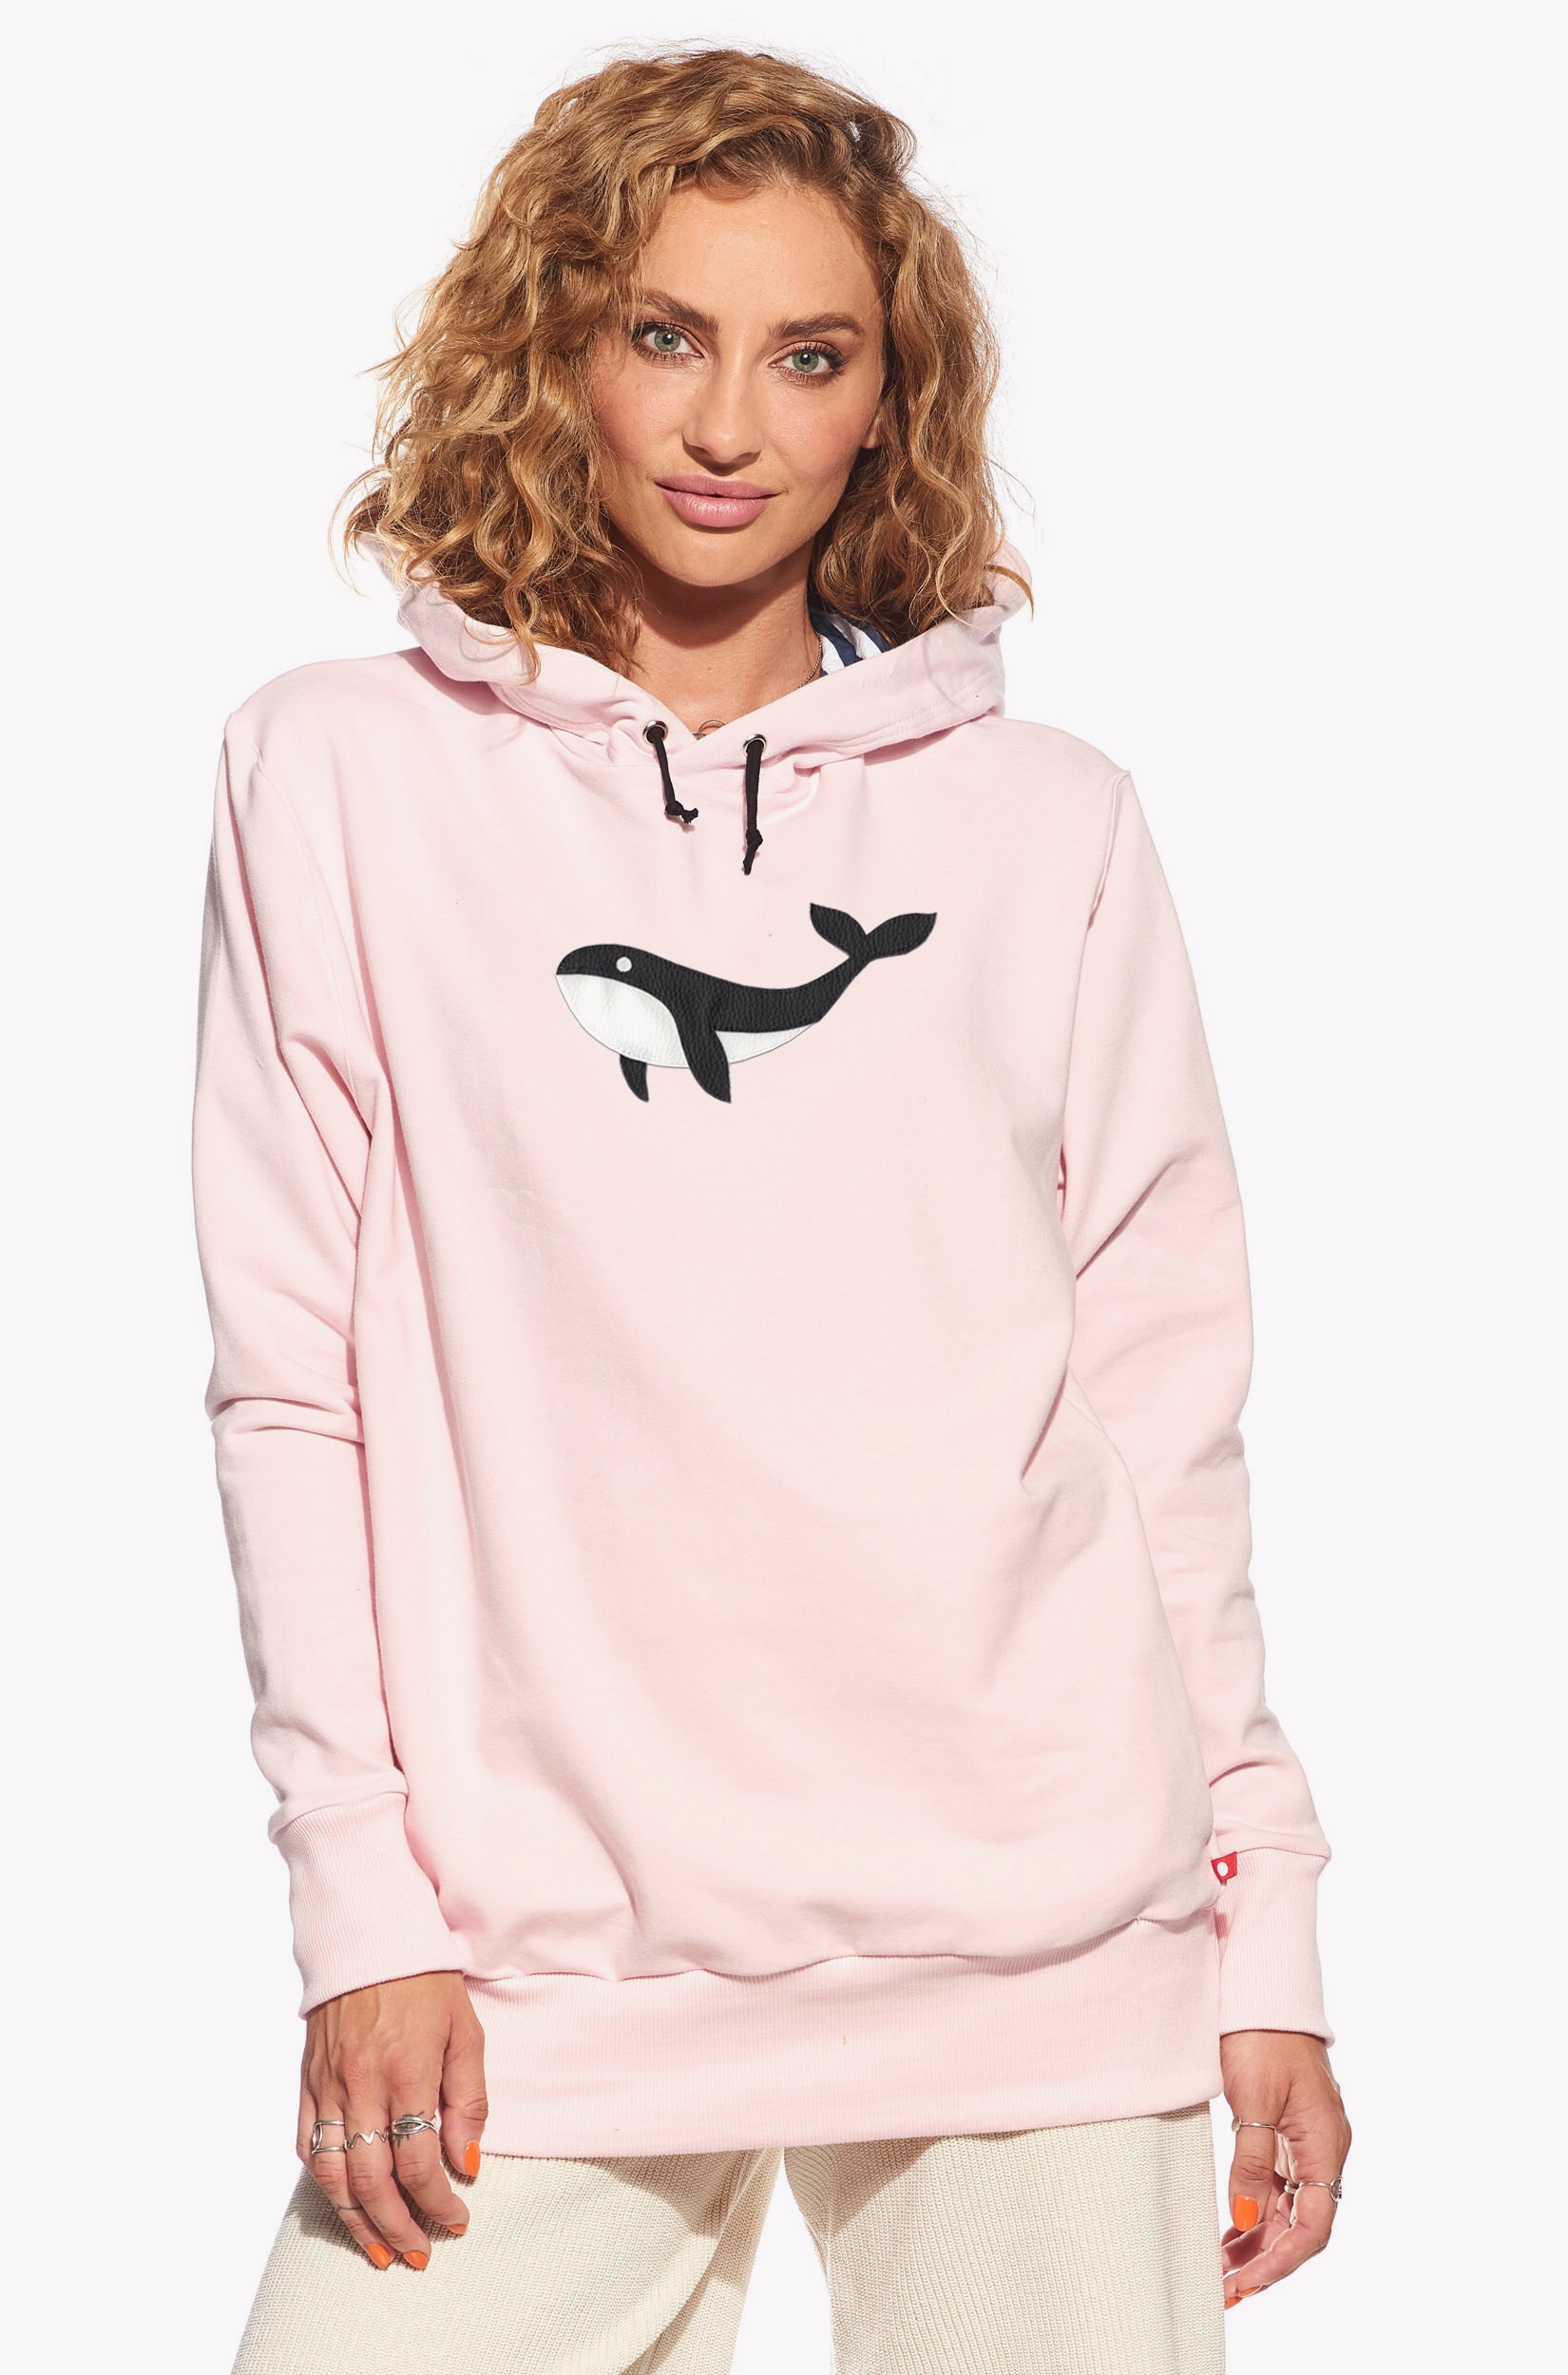 Hoodie with whale